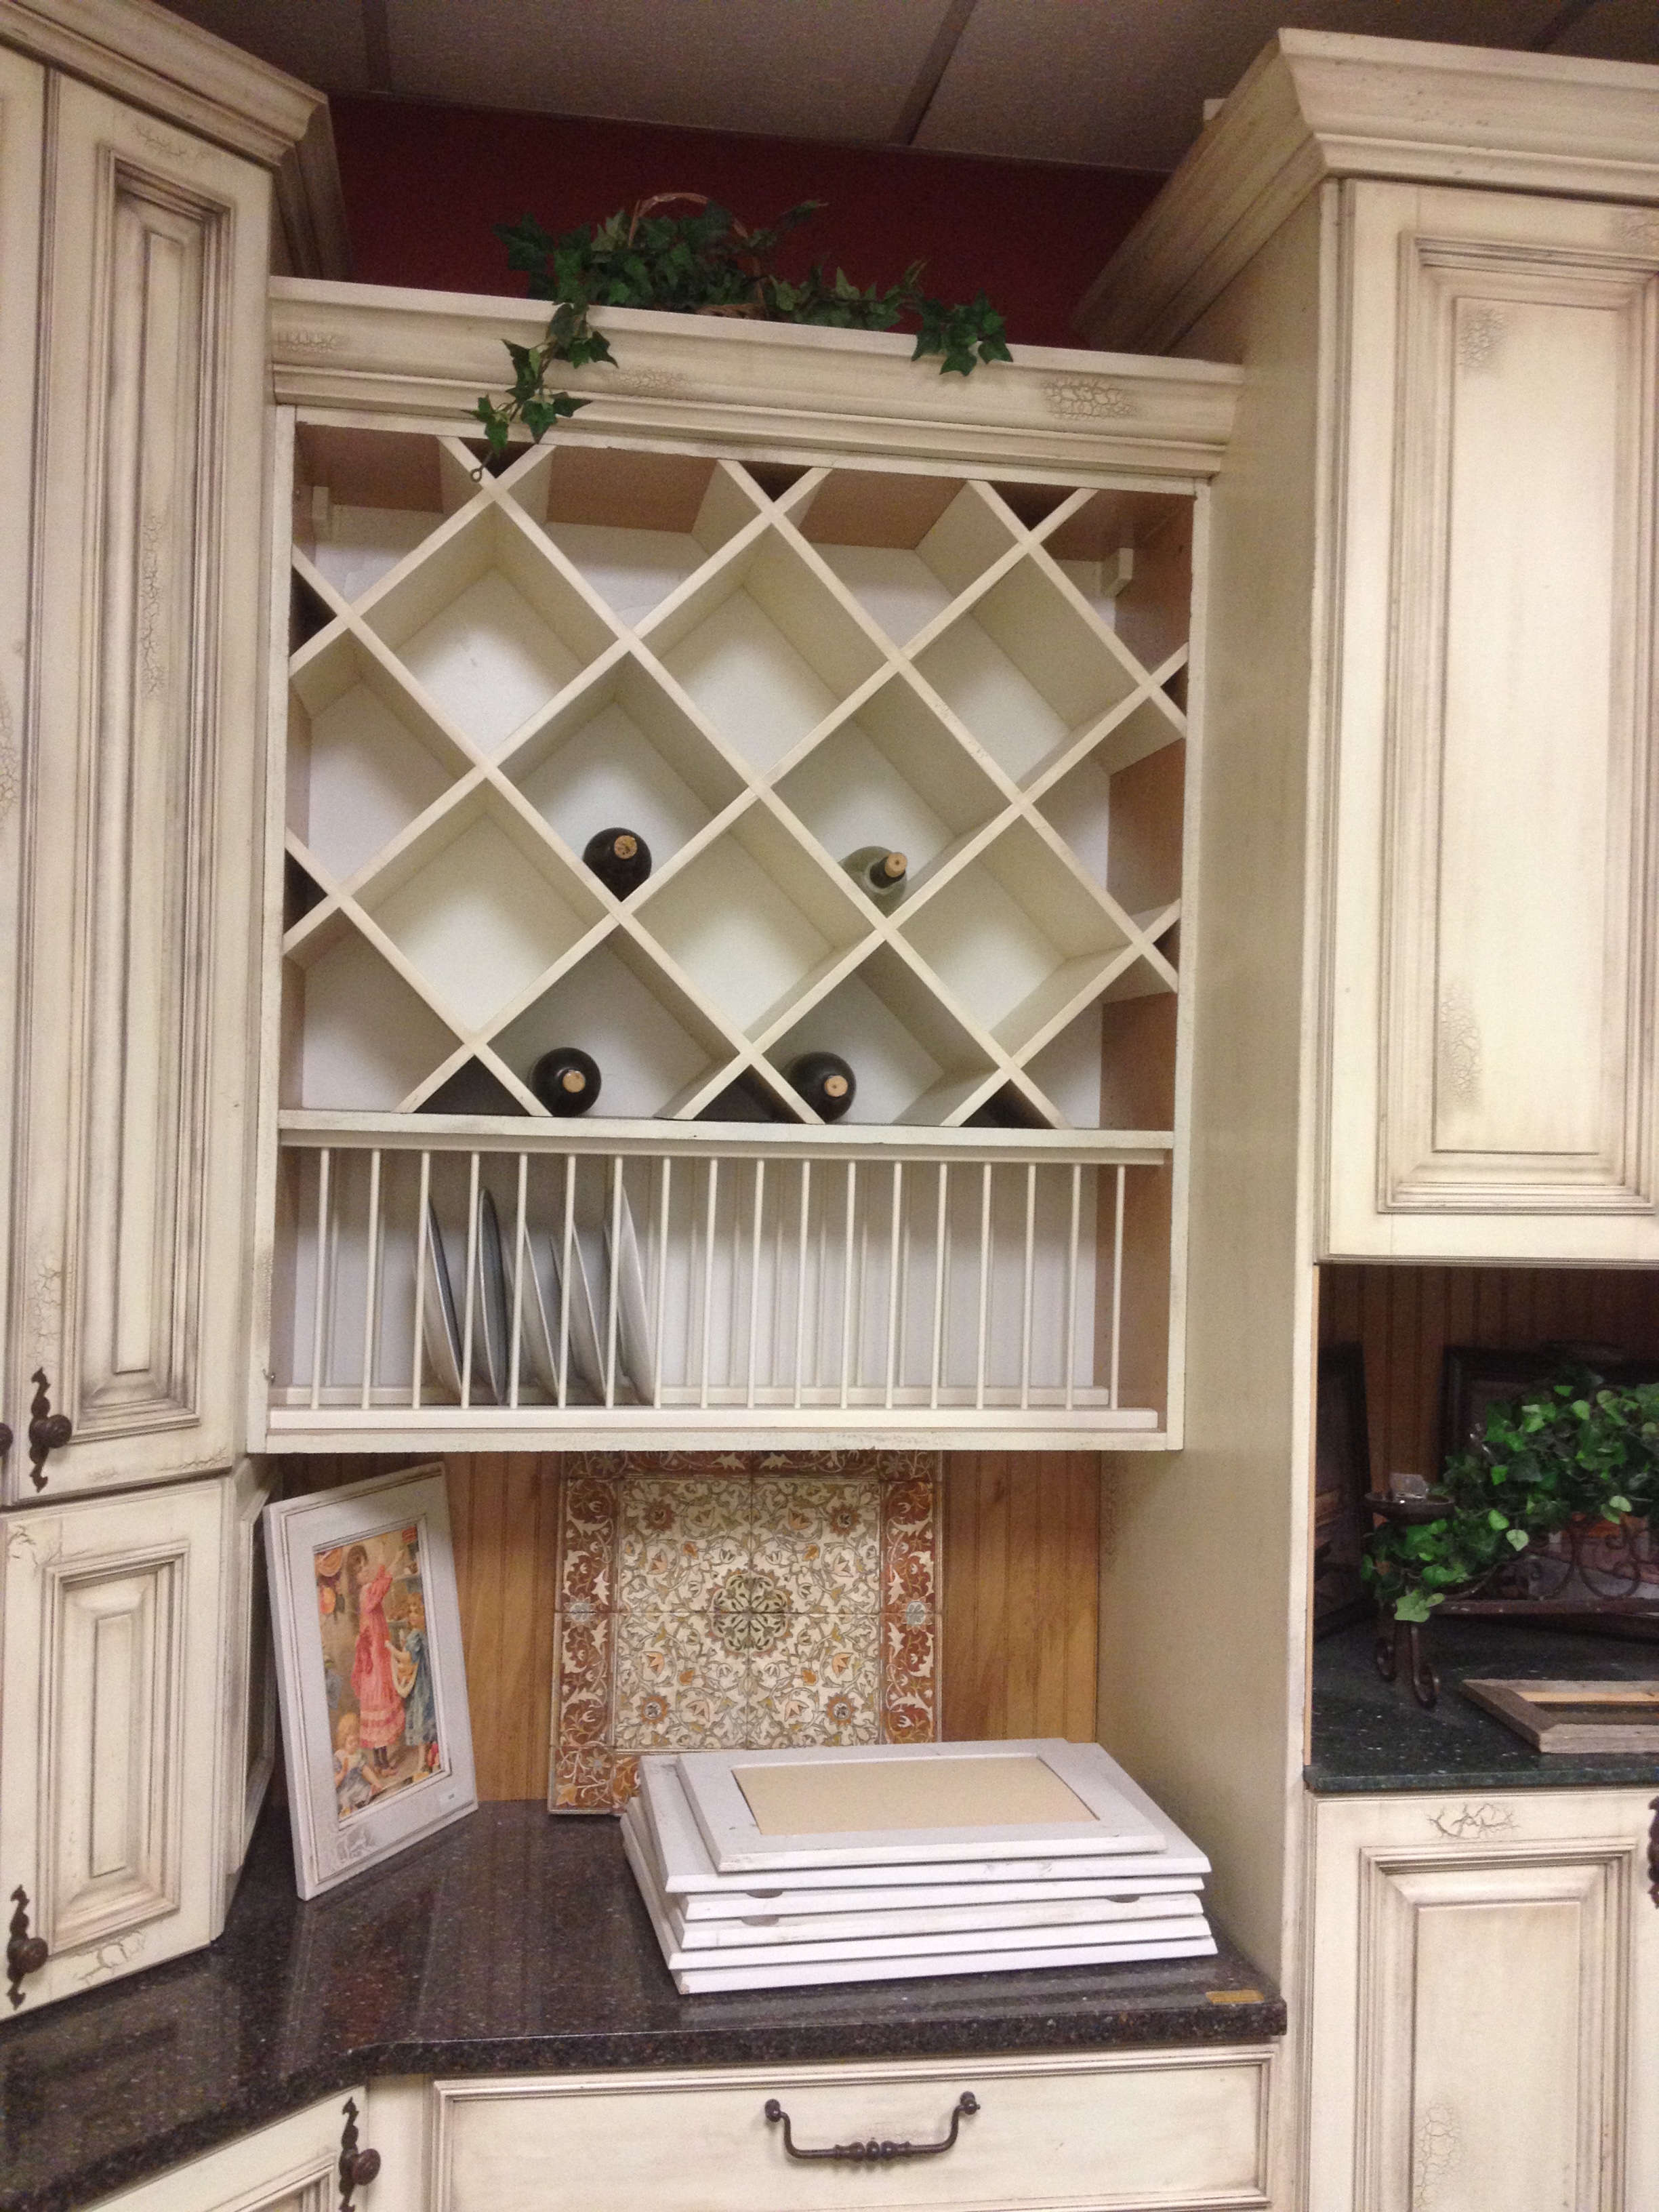 Oklahoma City Cabinetmaker Painted Kitchen Cabinet Distressed